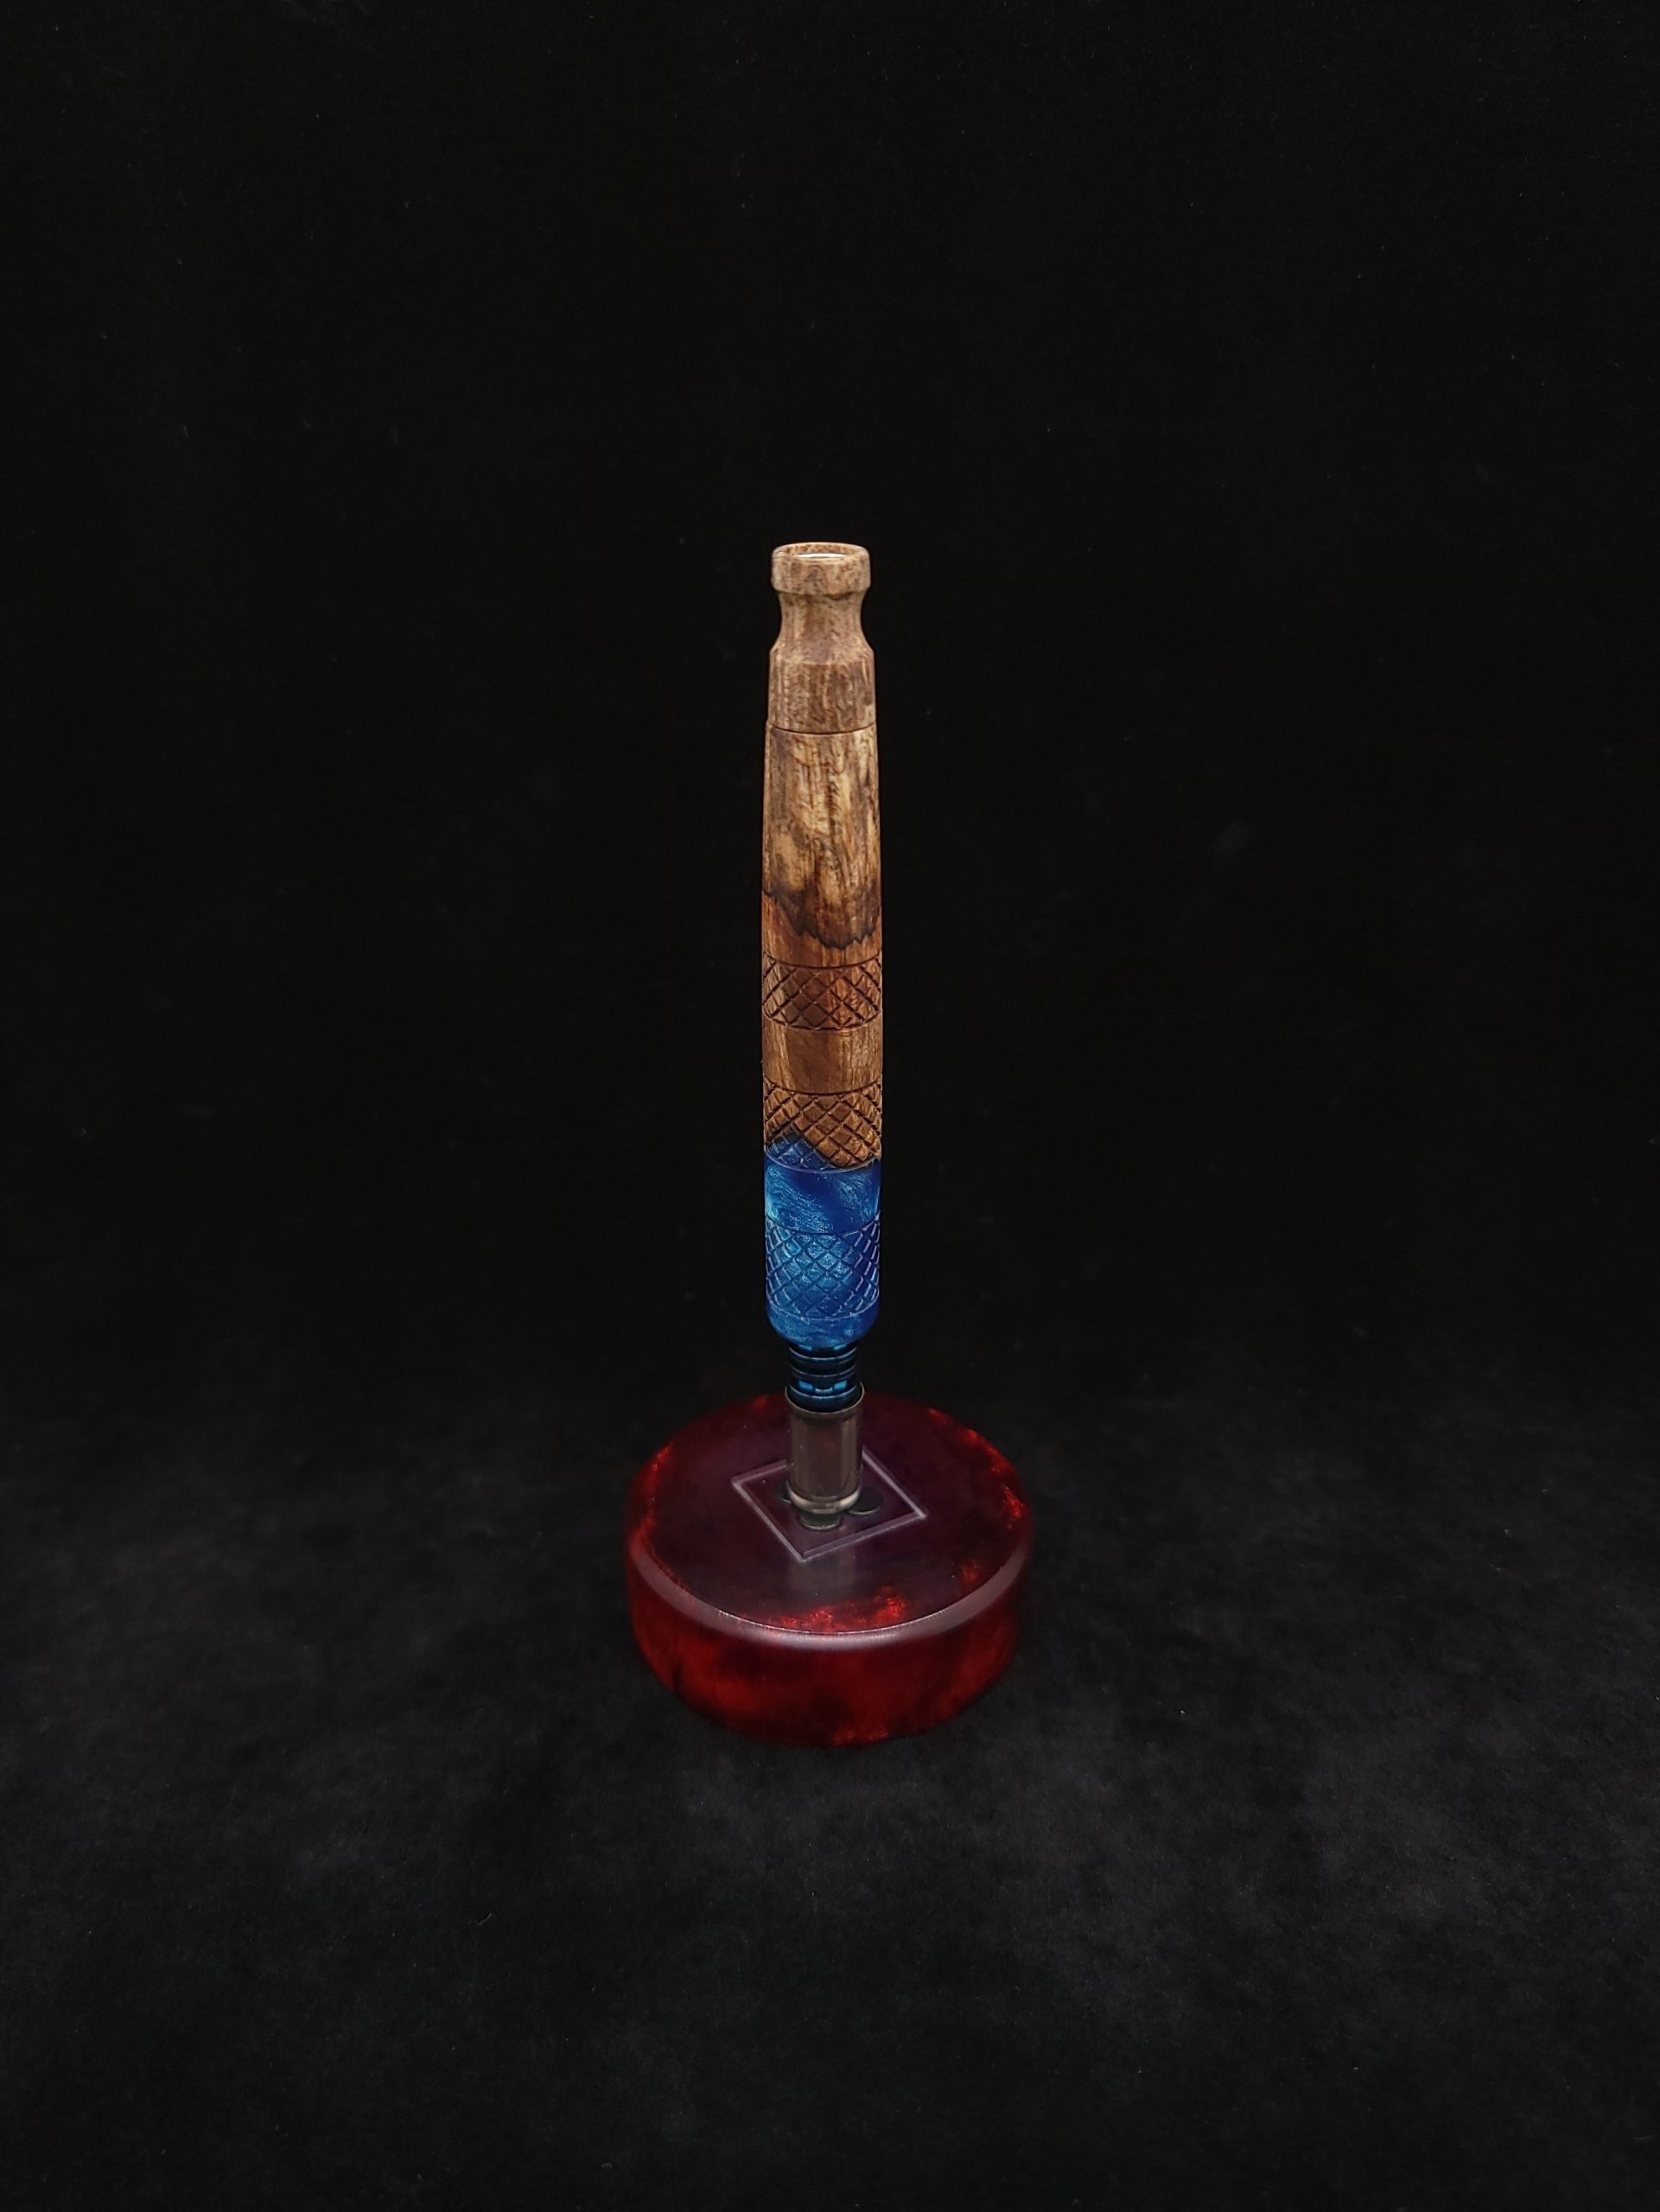 This image portrays Limited Run-Knurled XL Dynavap Stem/Burl Hybrid + Matching Mouthpiece by Dovetail Woodwork.